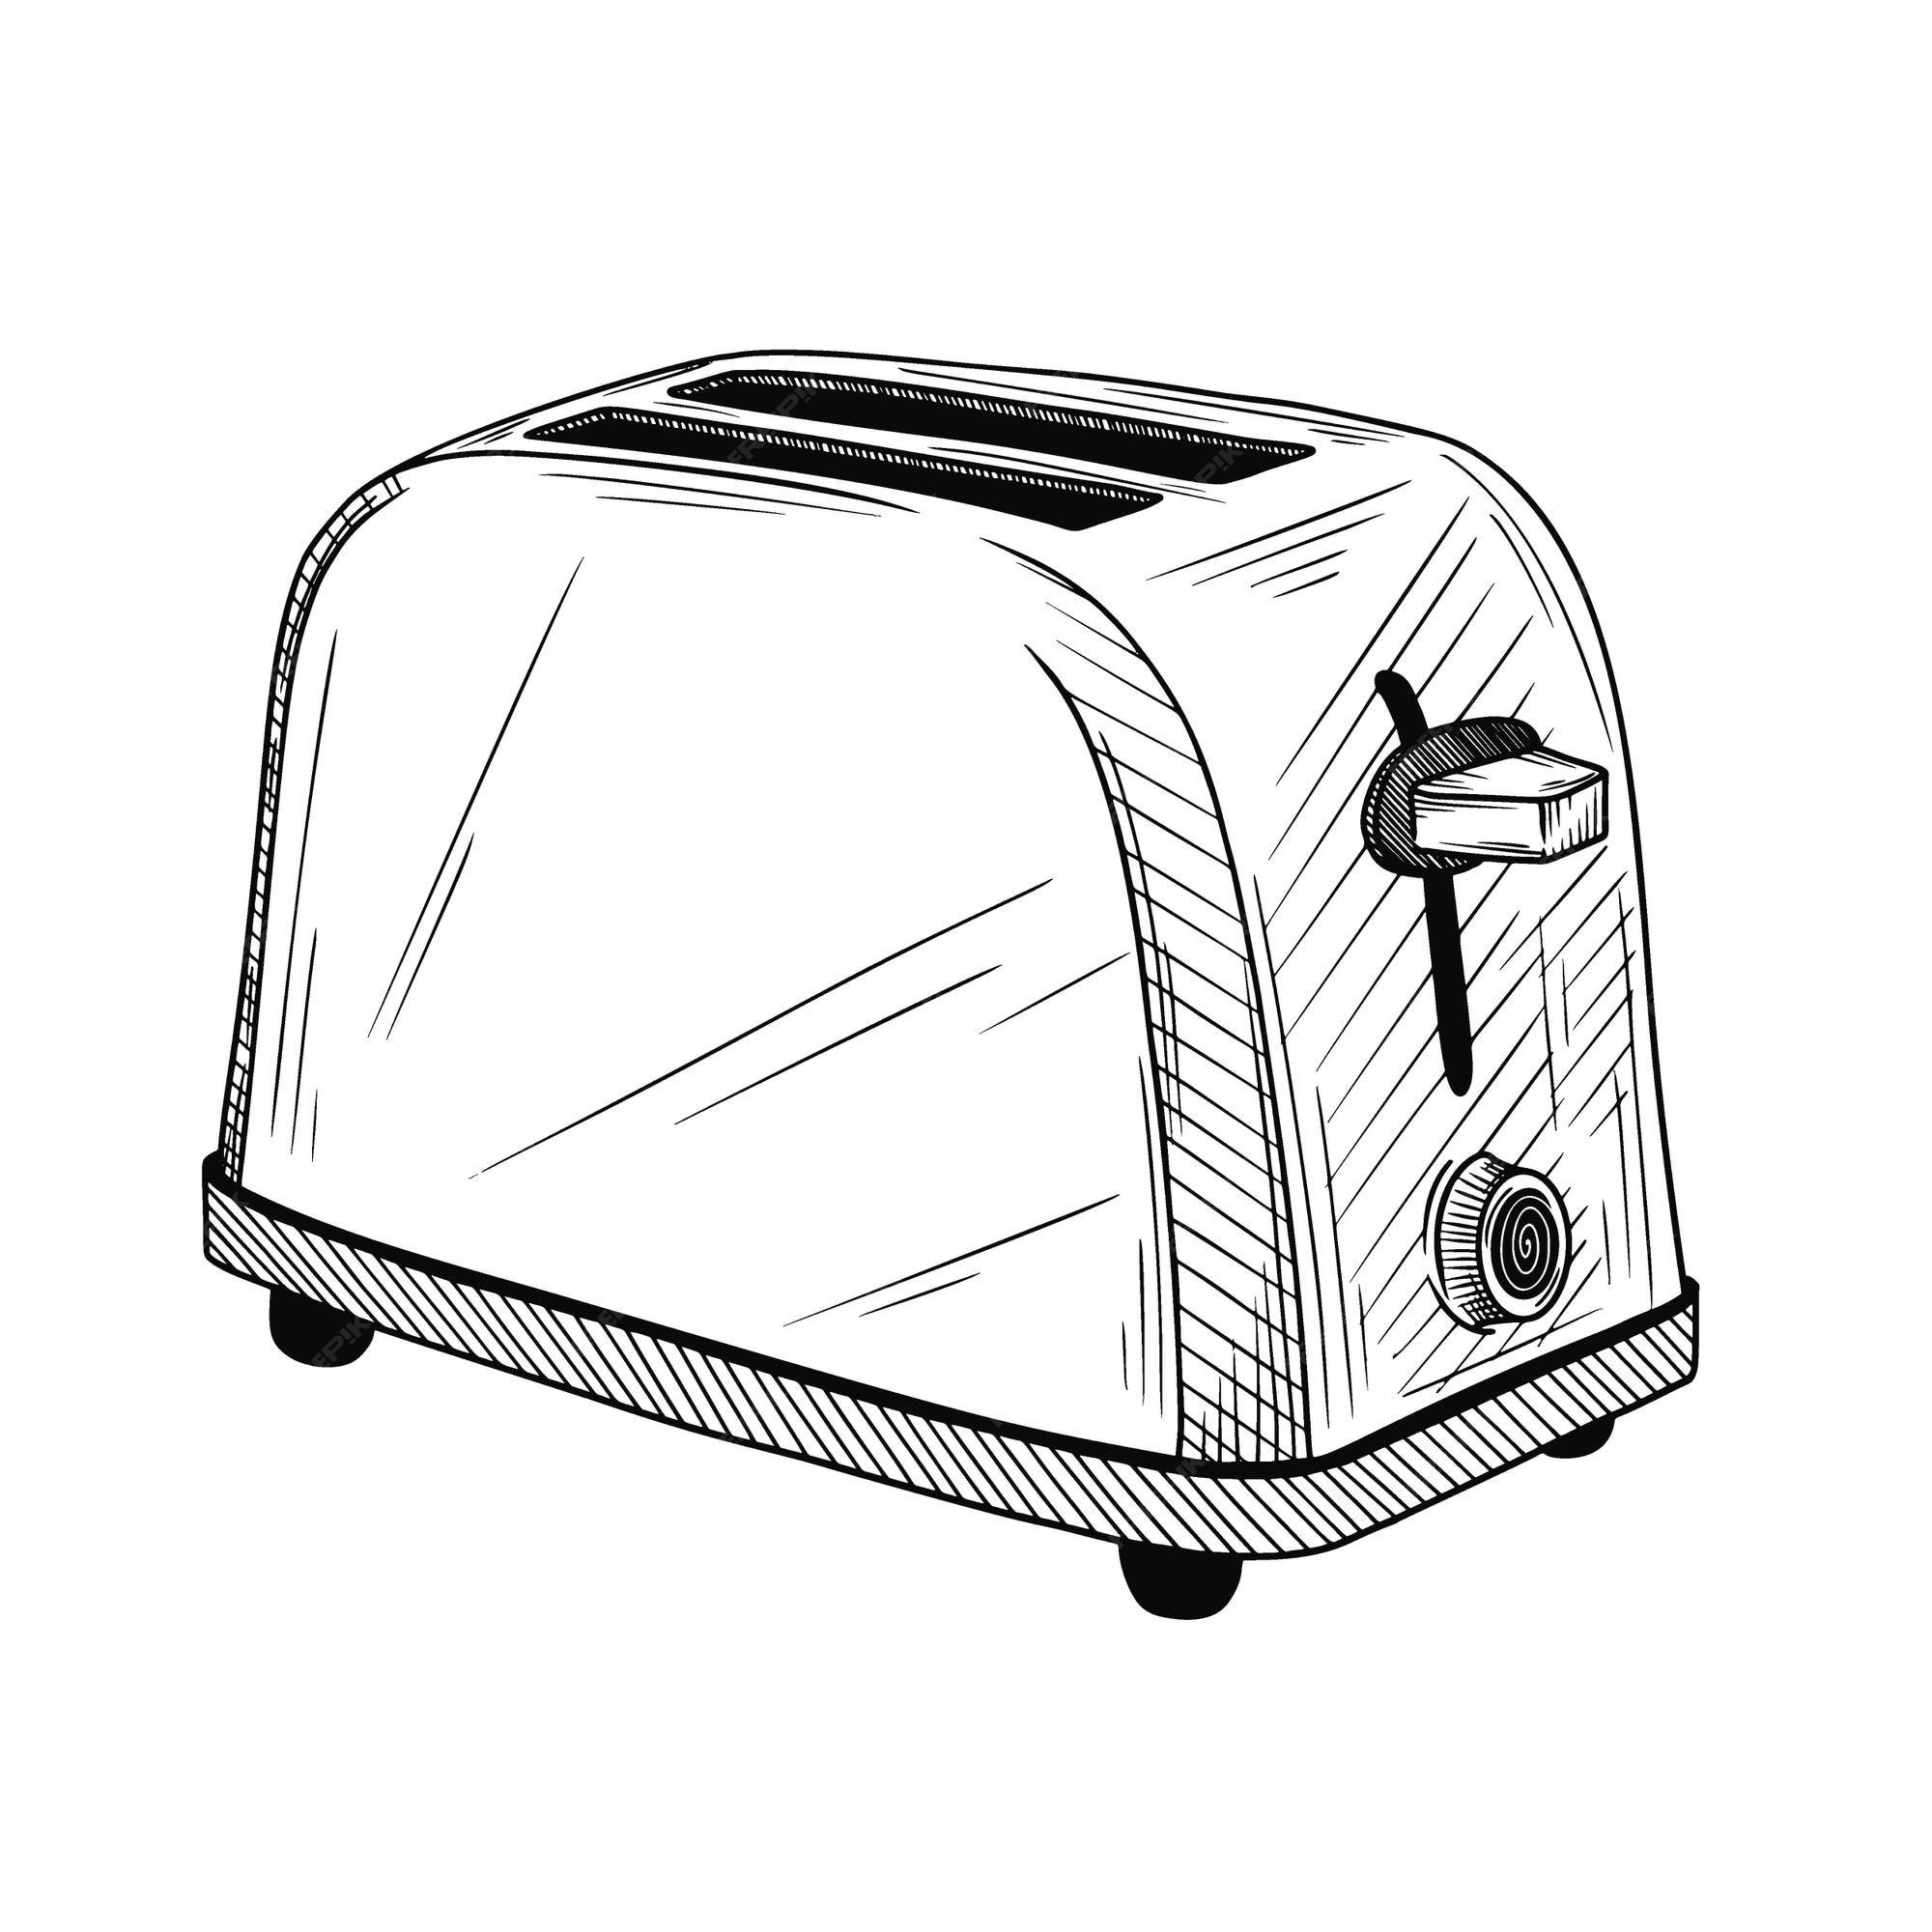 Premium Vector Sketch toaster on a white background. illustration in